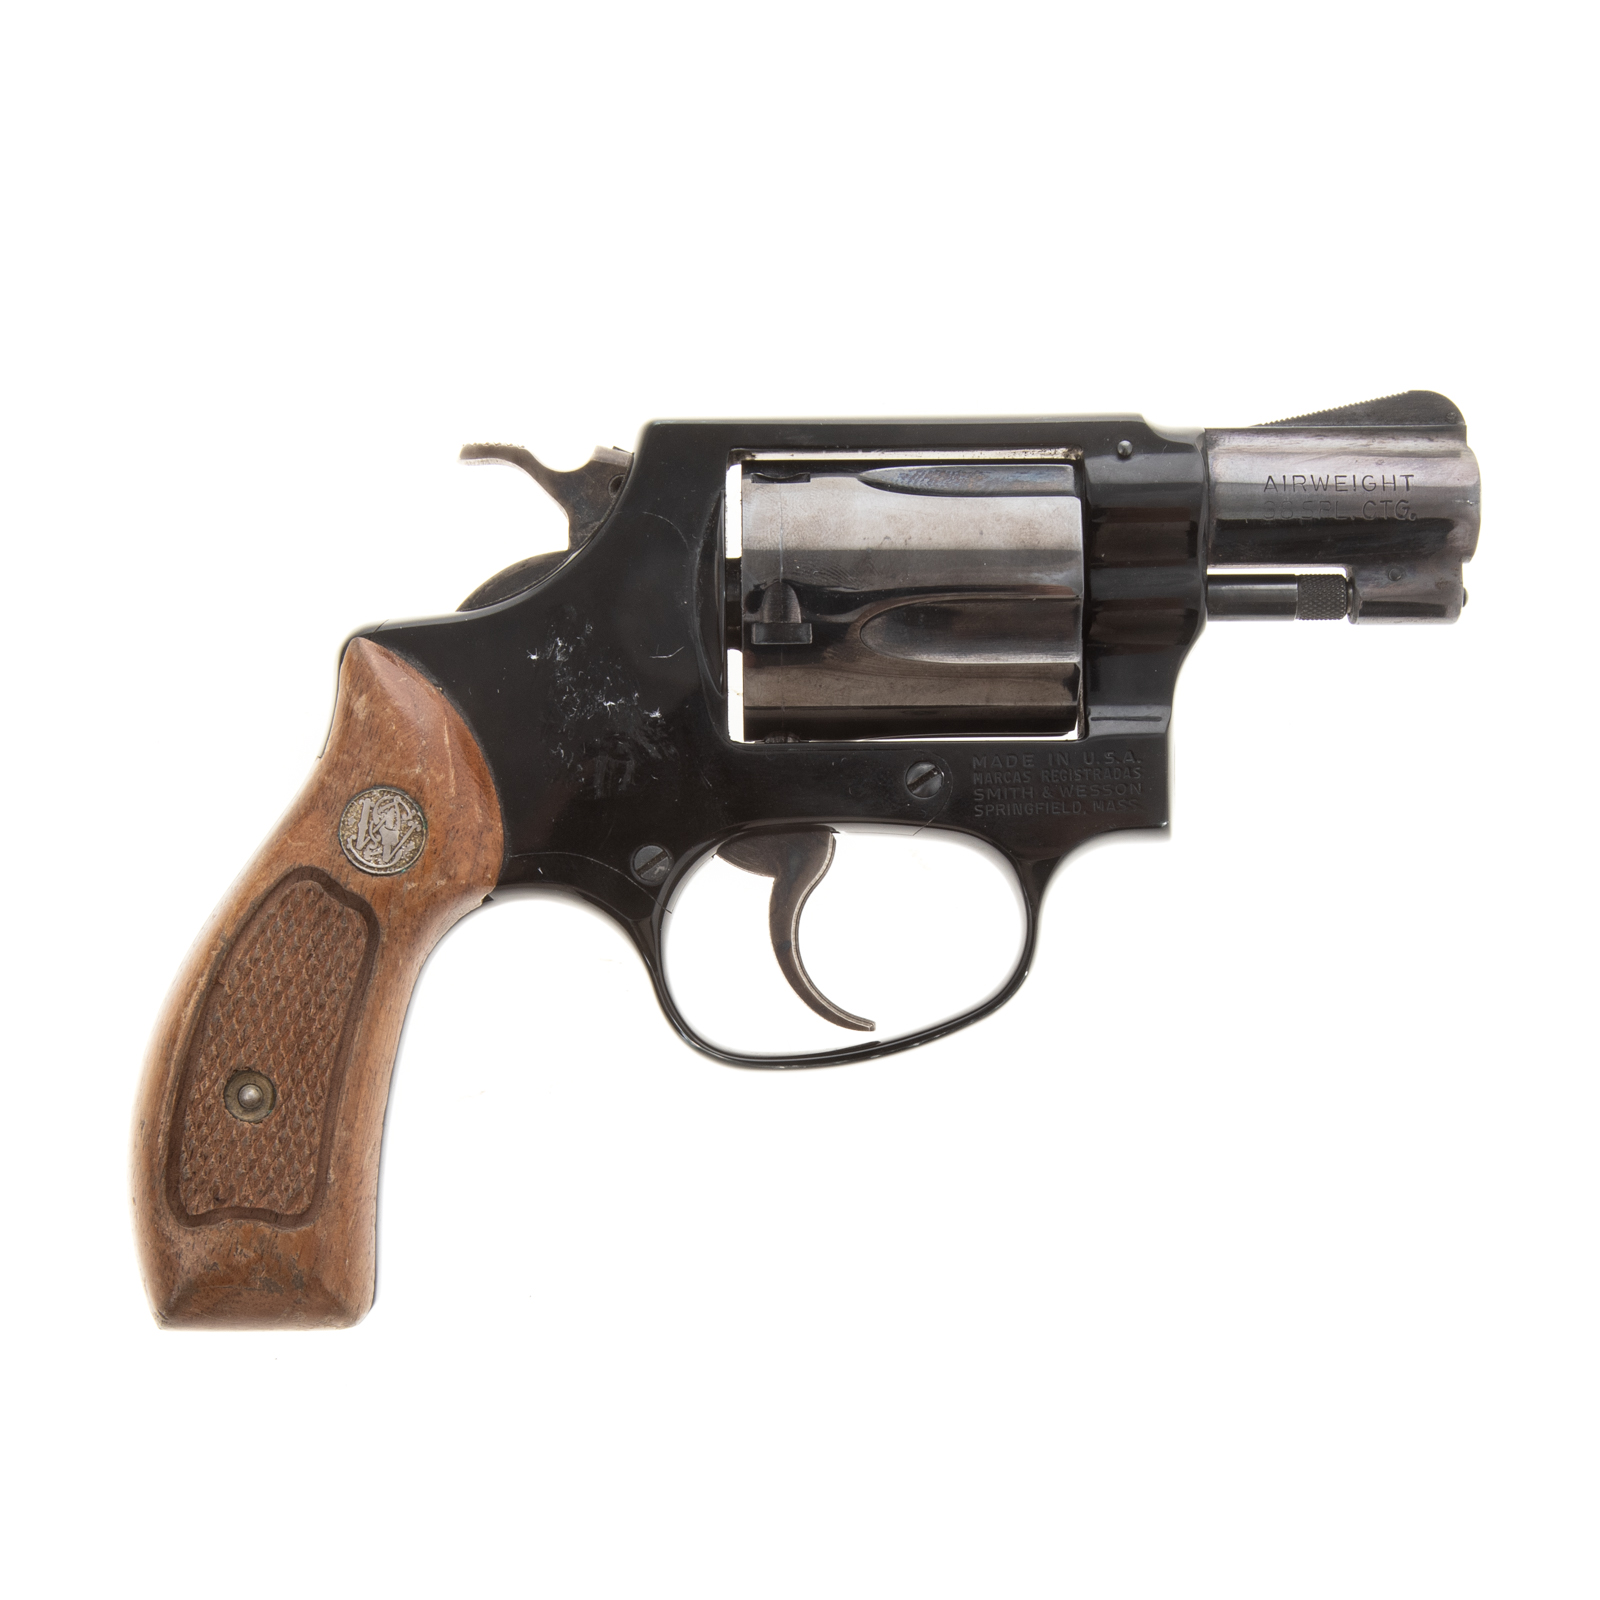 SMITH AND WESSON AIRWEIGHT DOUBLE